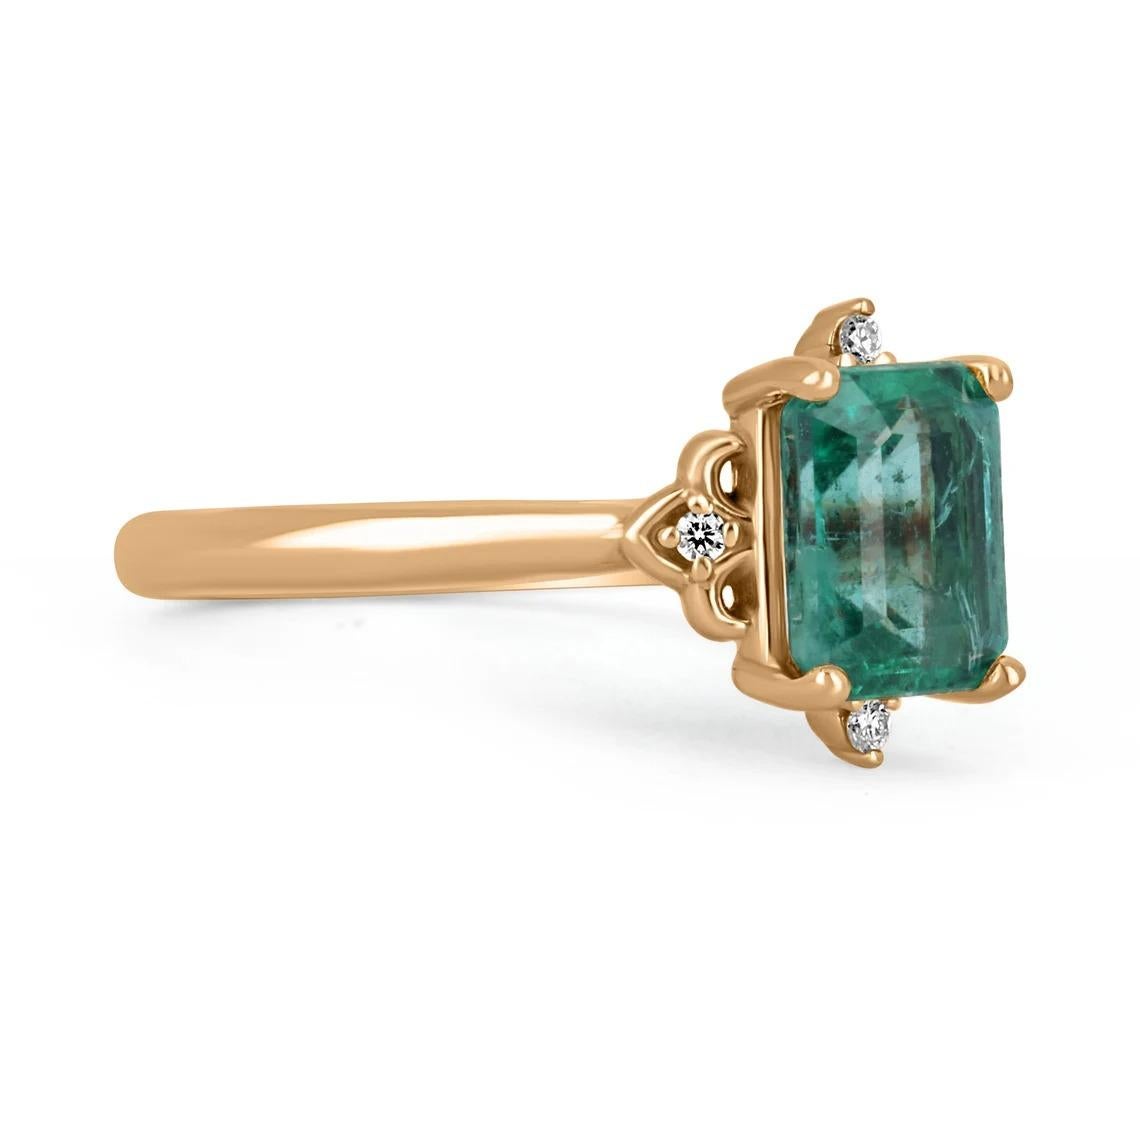 Displayed is a contemporary emerald and diamond engagement ring/right-hand ring in 14K rose gold. This gorgeous ring carries a full 1.74-carat emerald in a secure four-prong setting. Fully faceted, this gemstone showcases excellent shine and